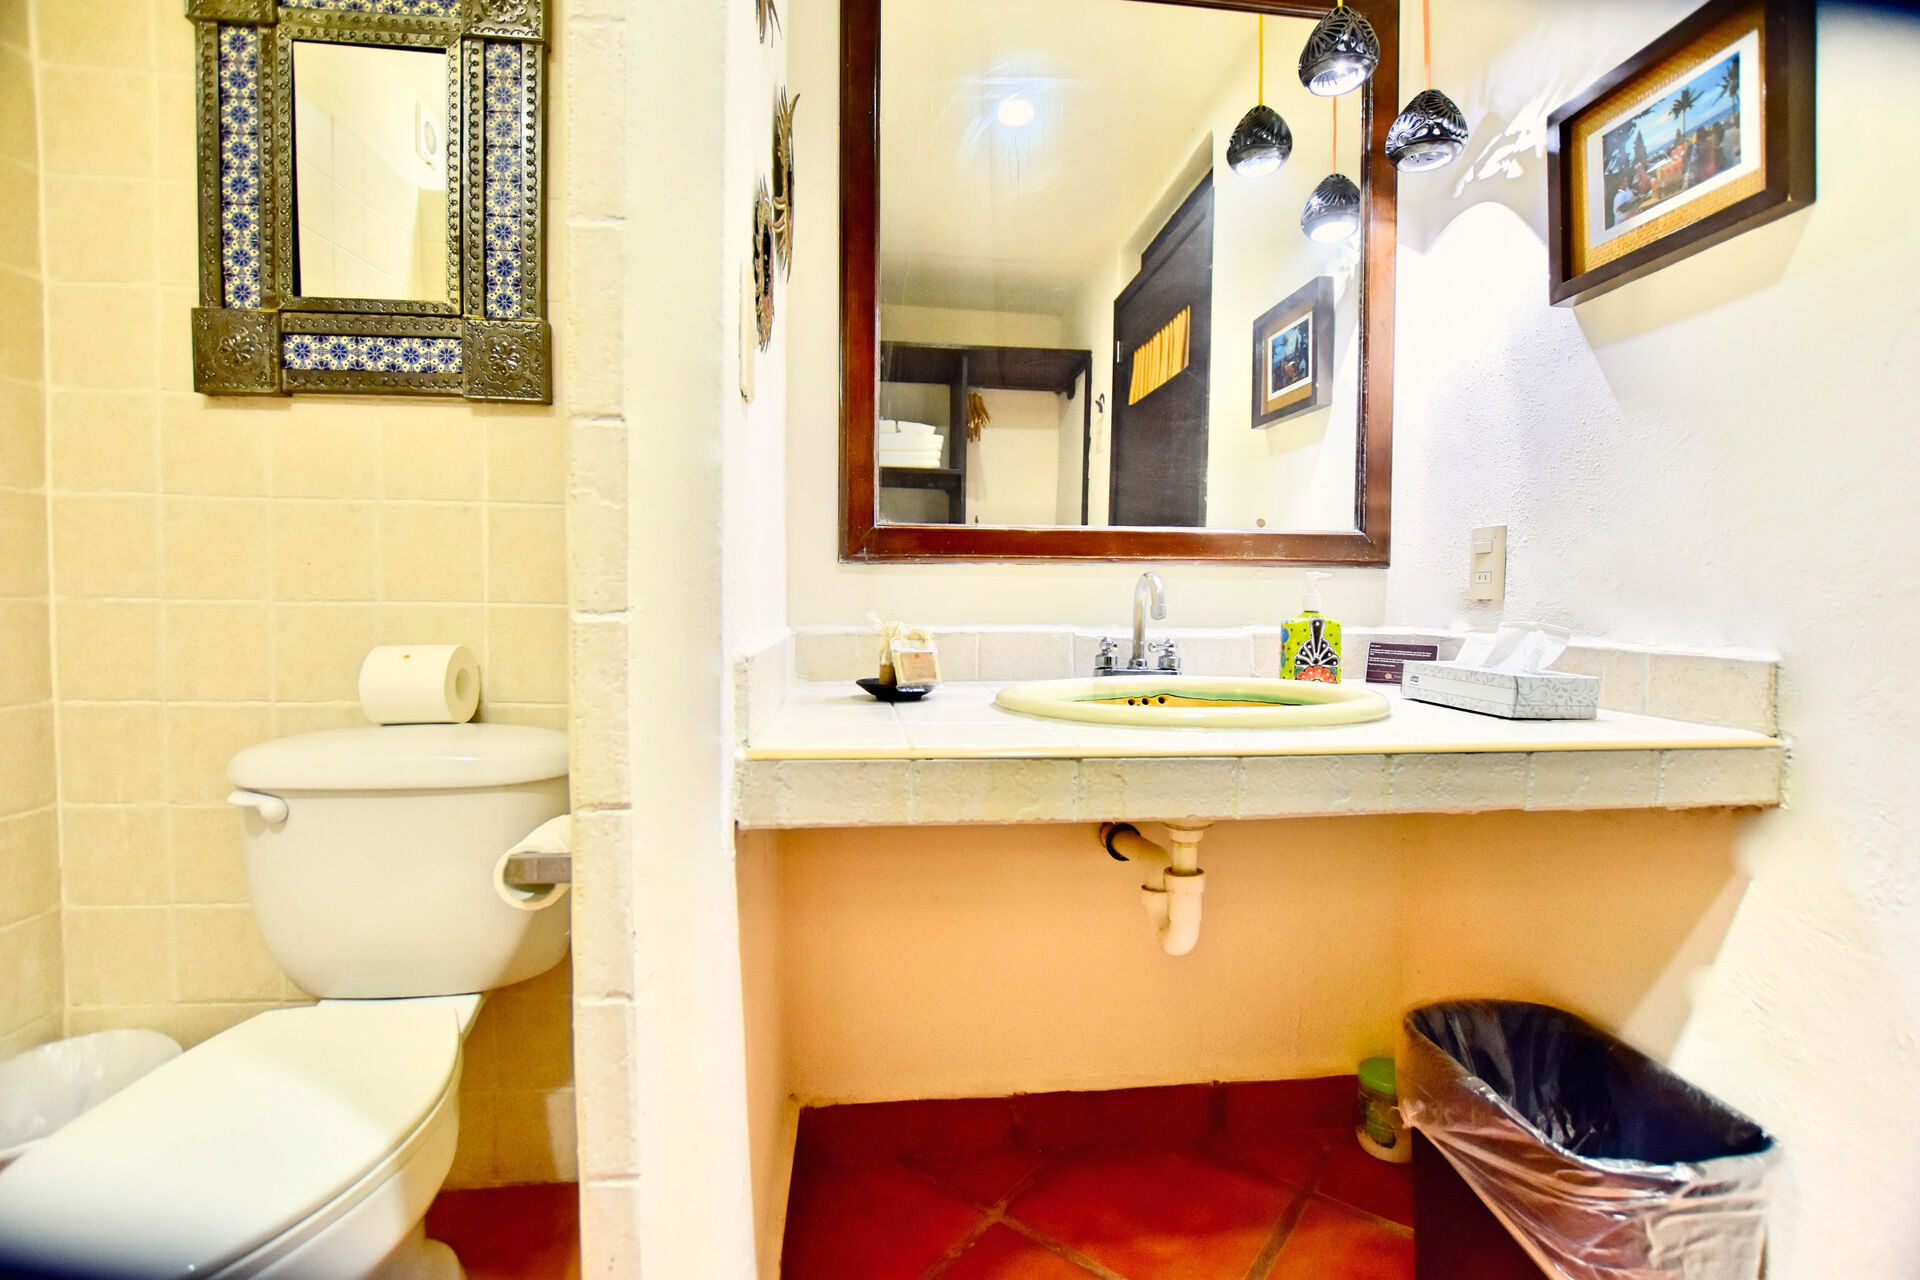 Bathroom with all amenities